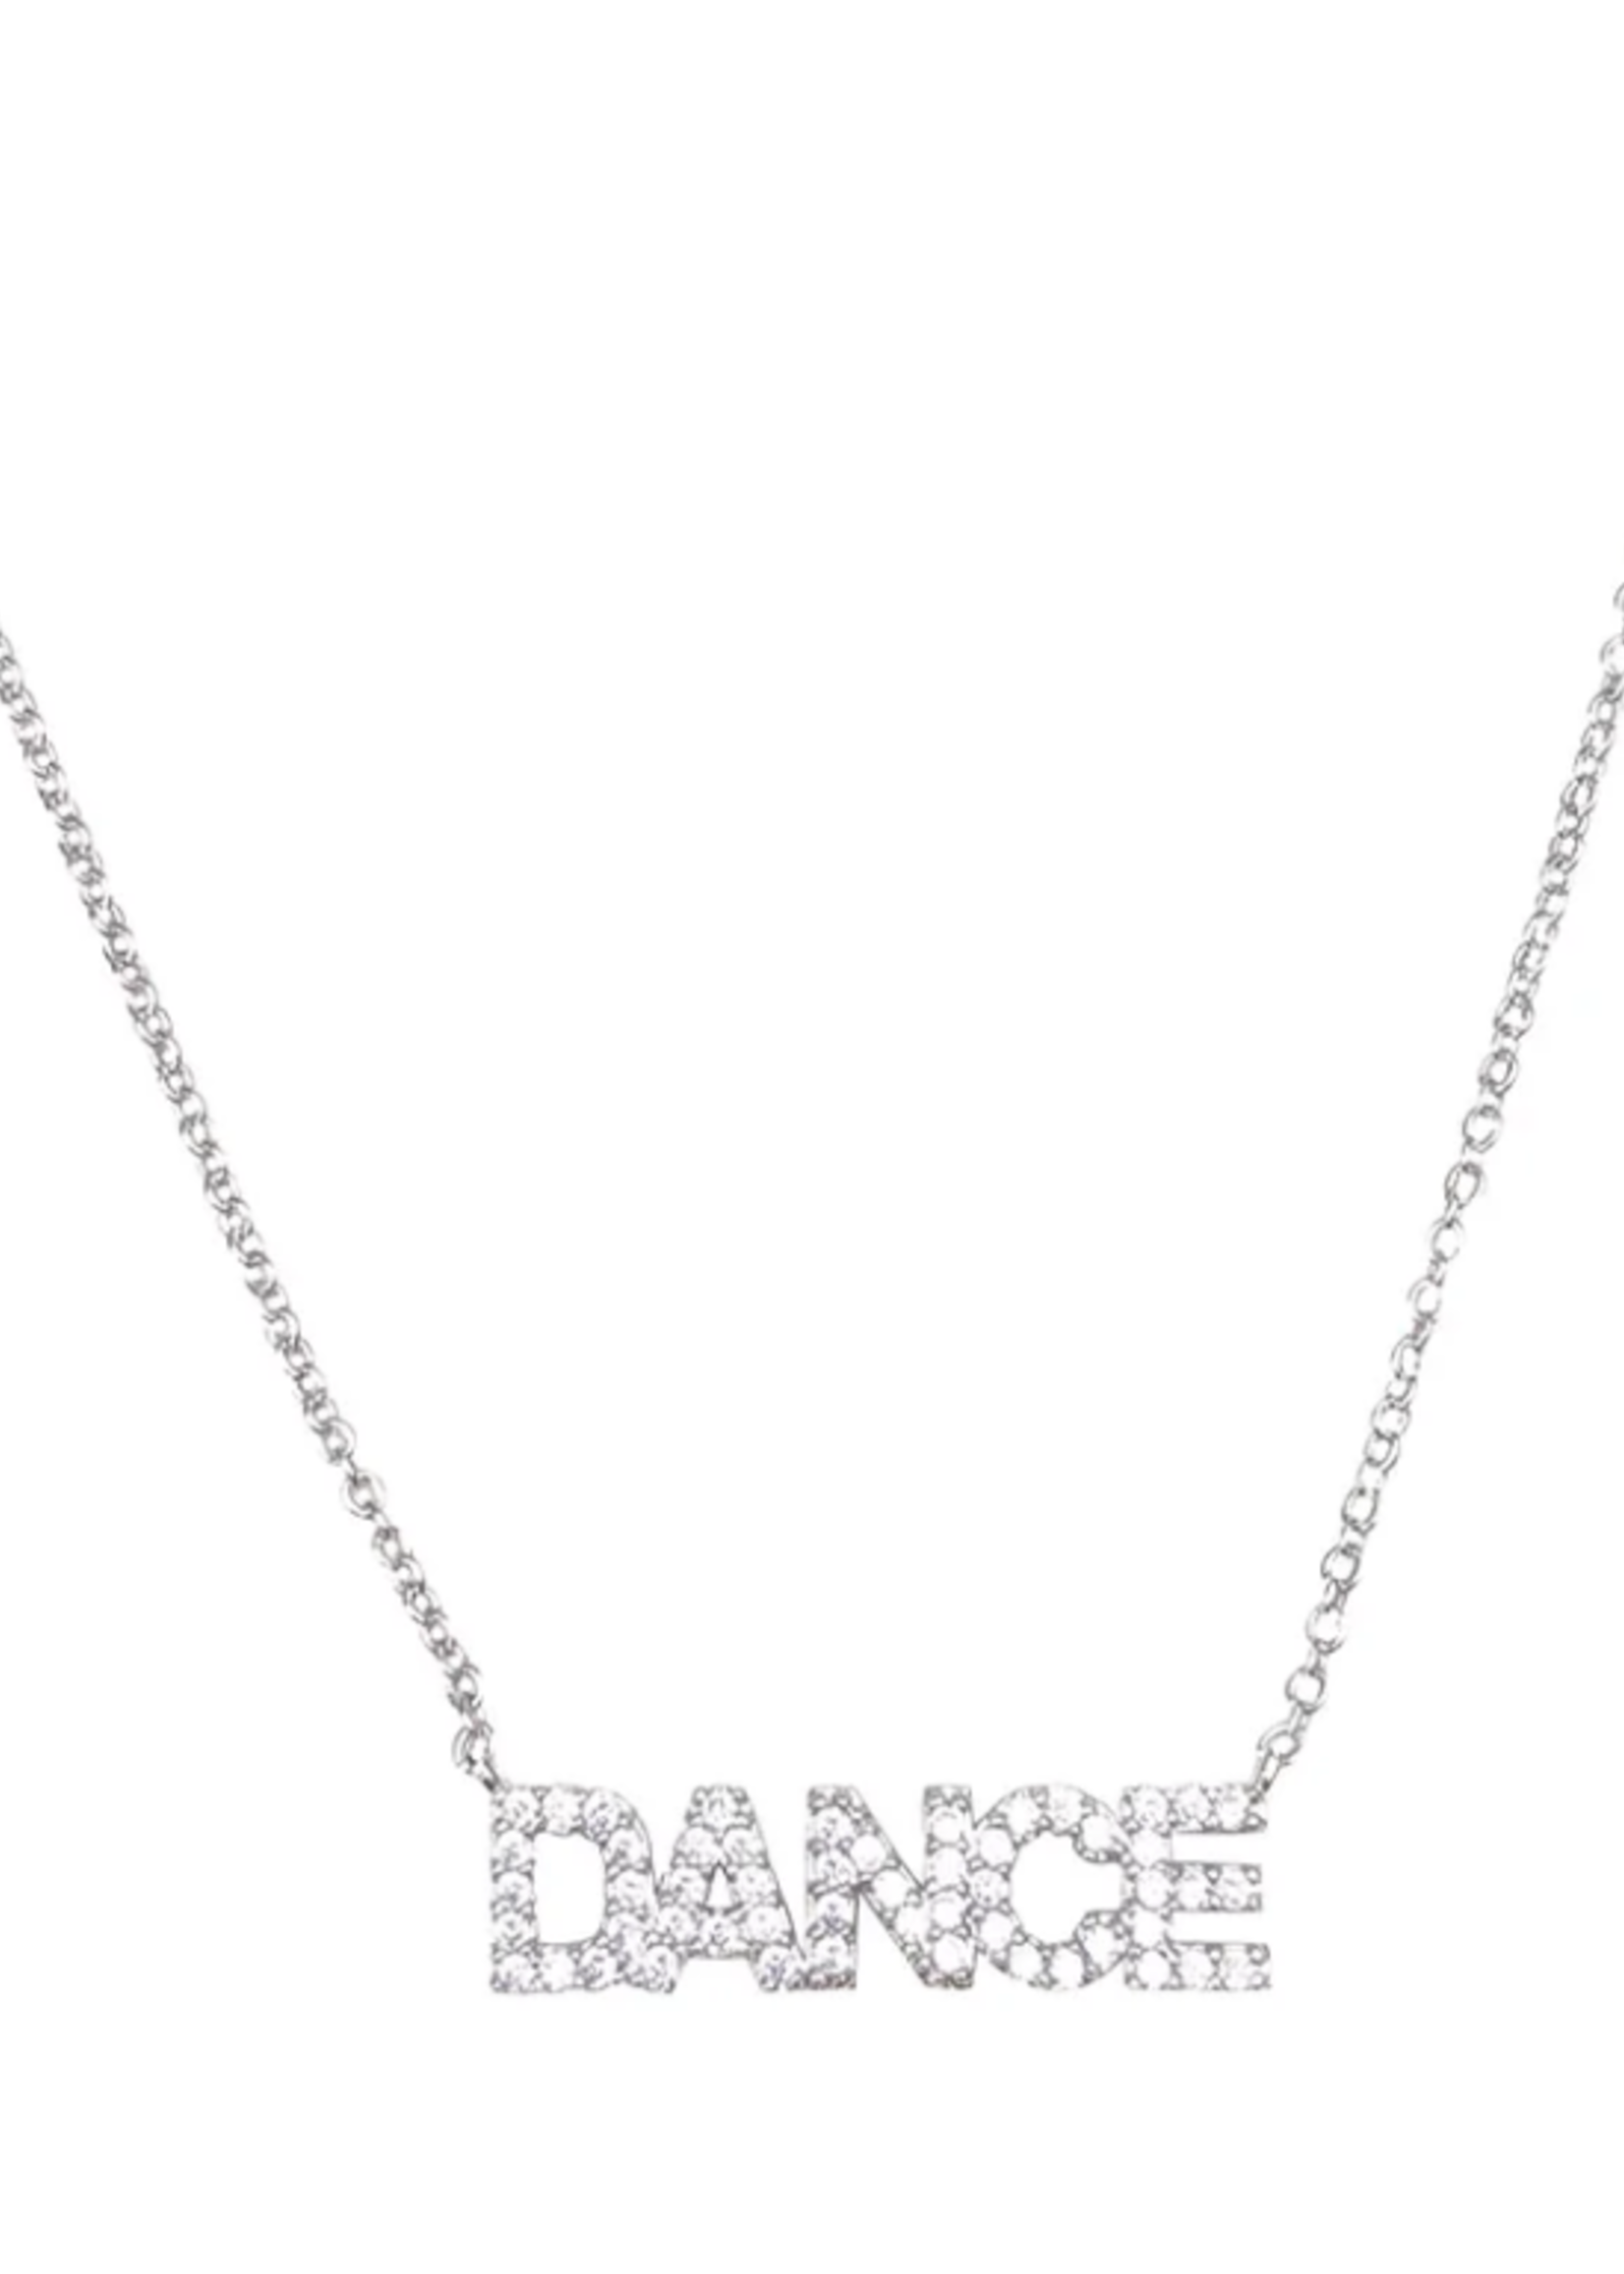 American Dance Supply Bar Necklace